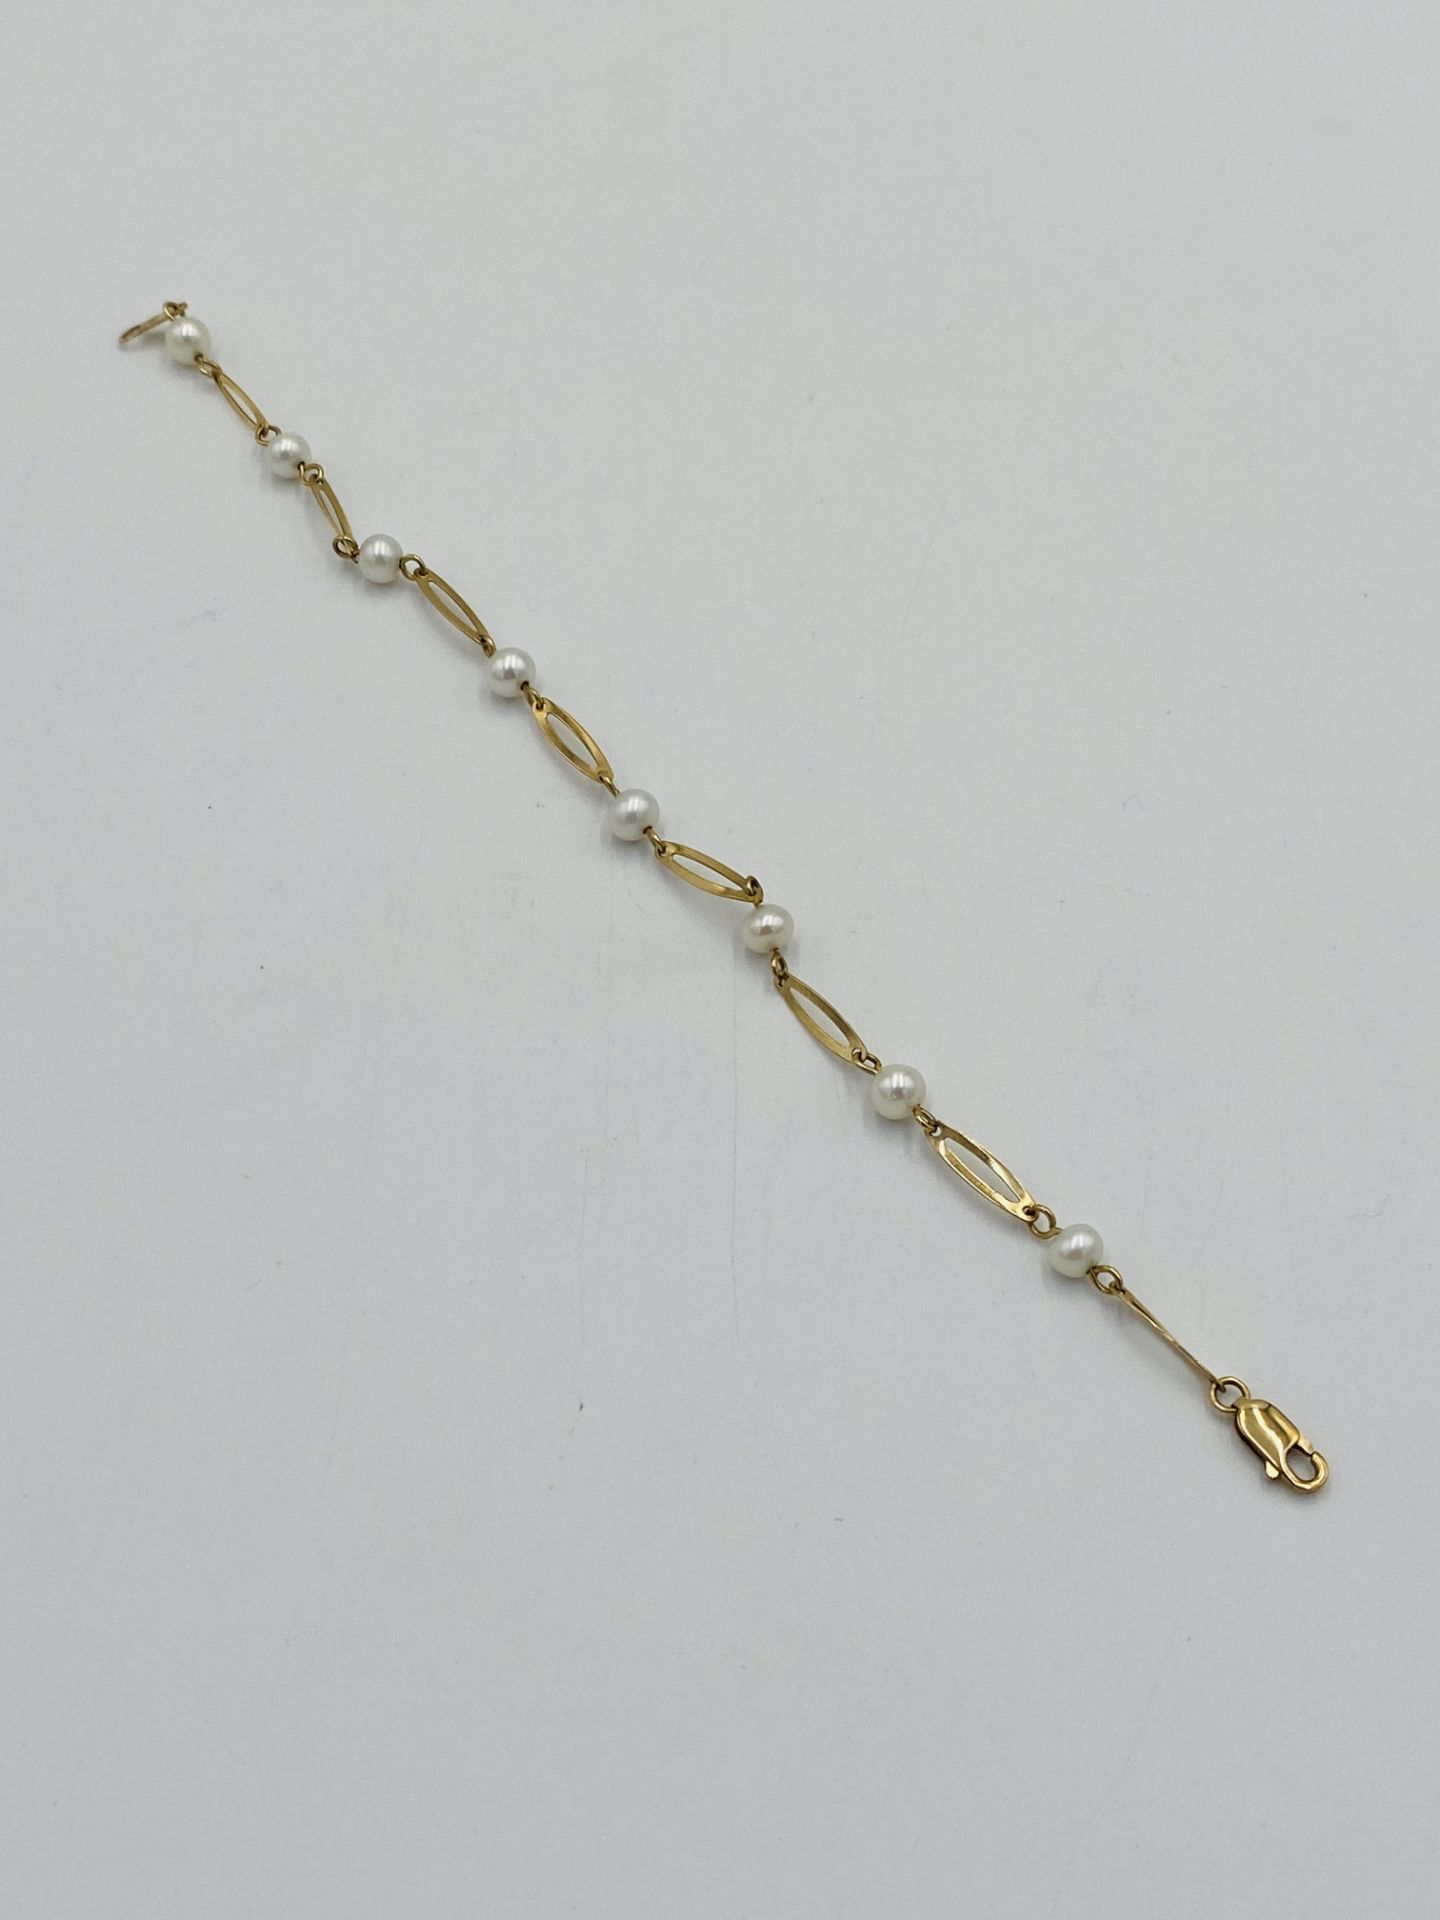 9ct gold and pearl bracelet - Image 5 of 5